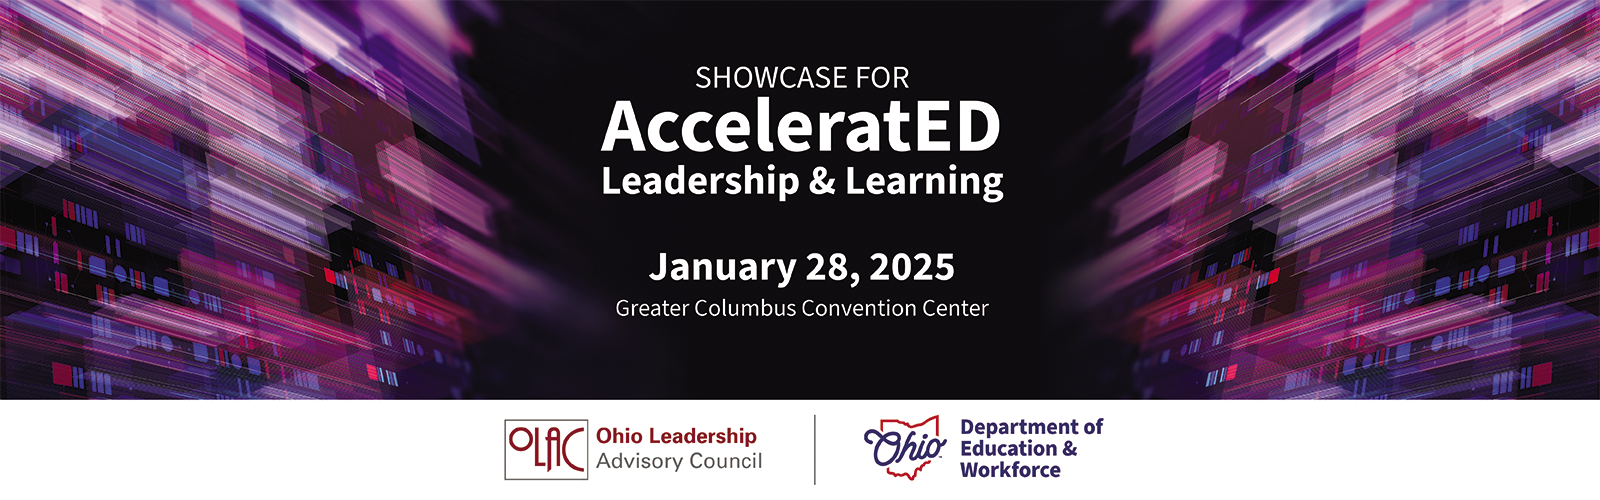 January 28, 2025 Showcase for Accelerated Leadership and Learning